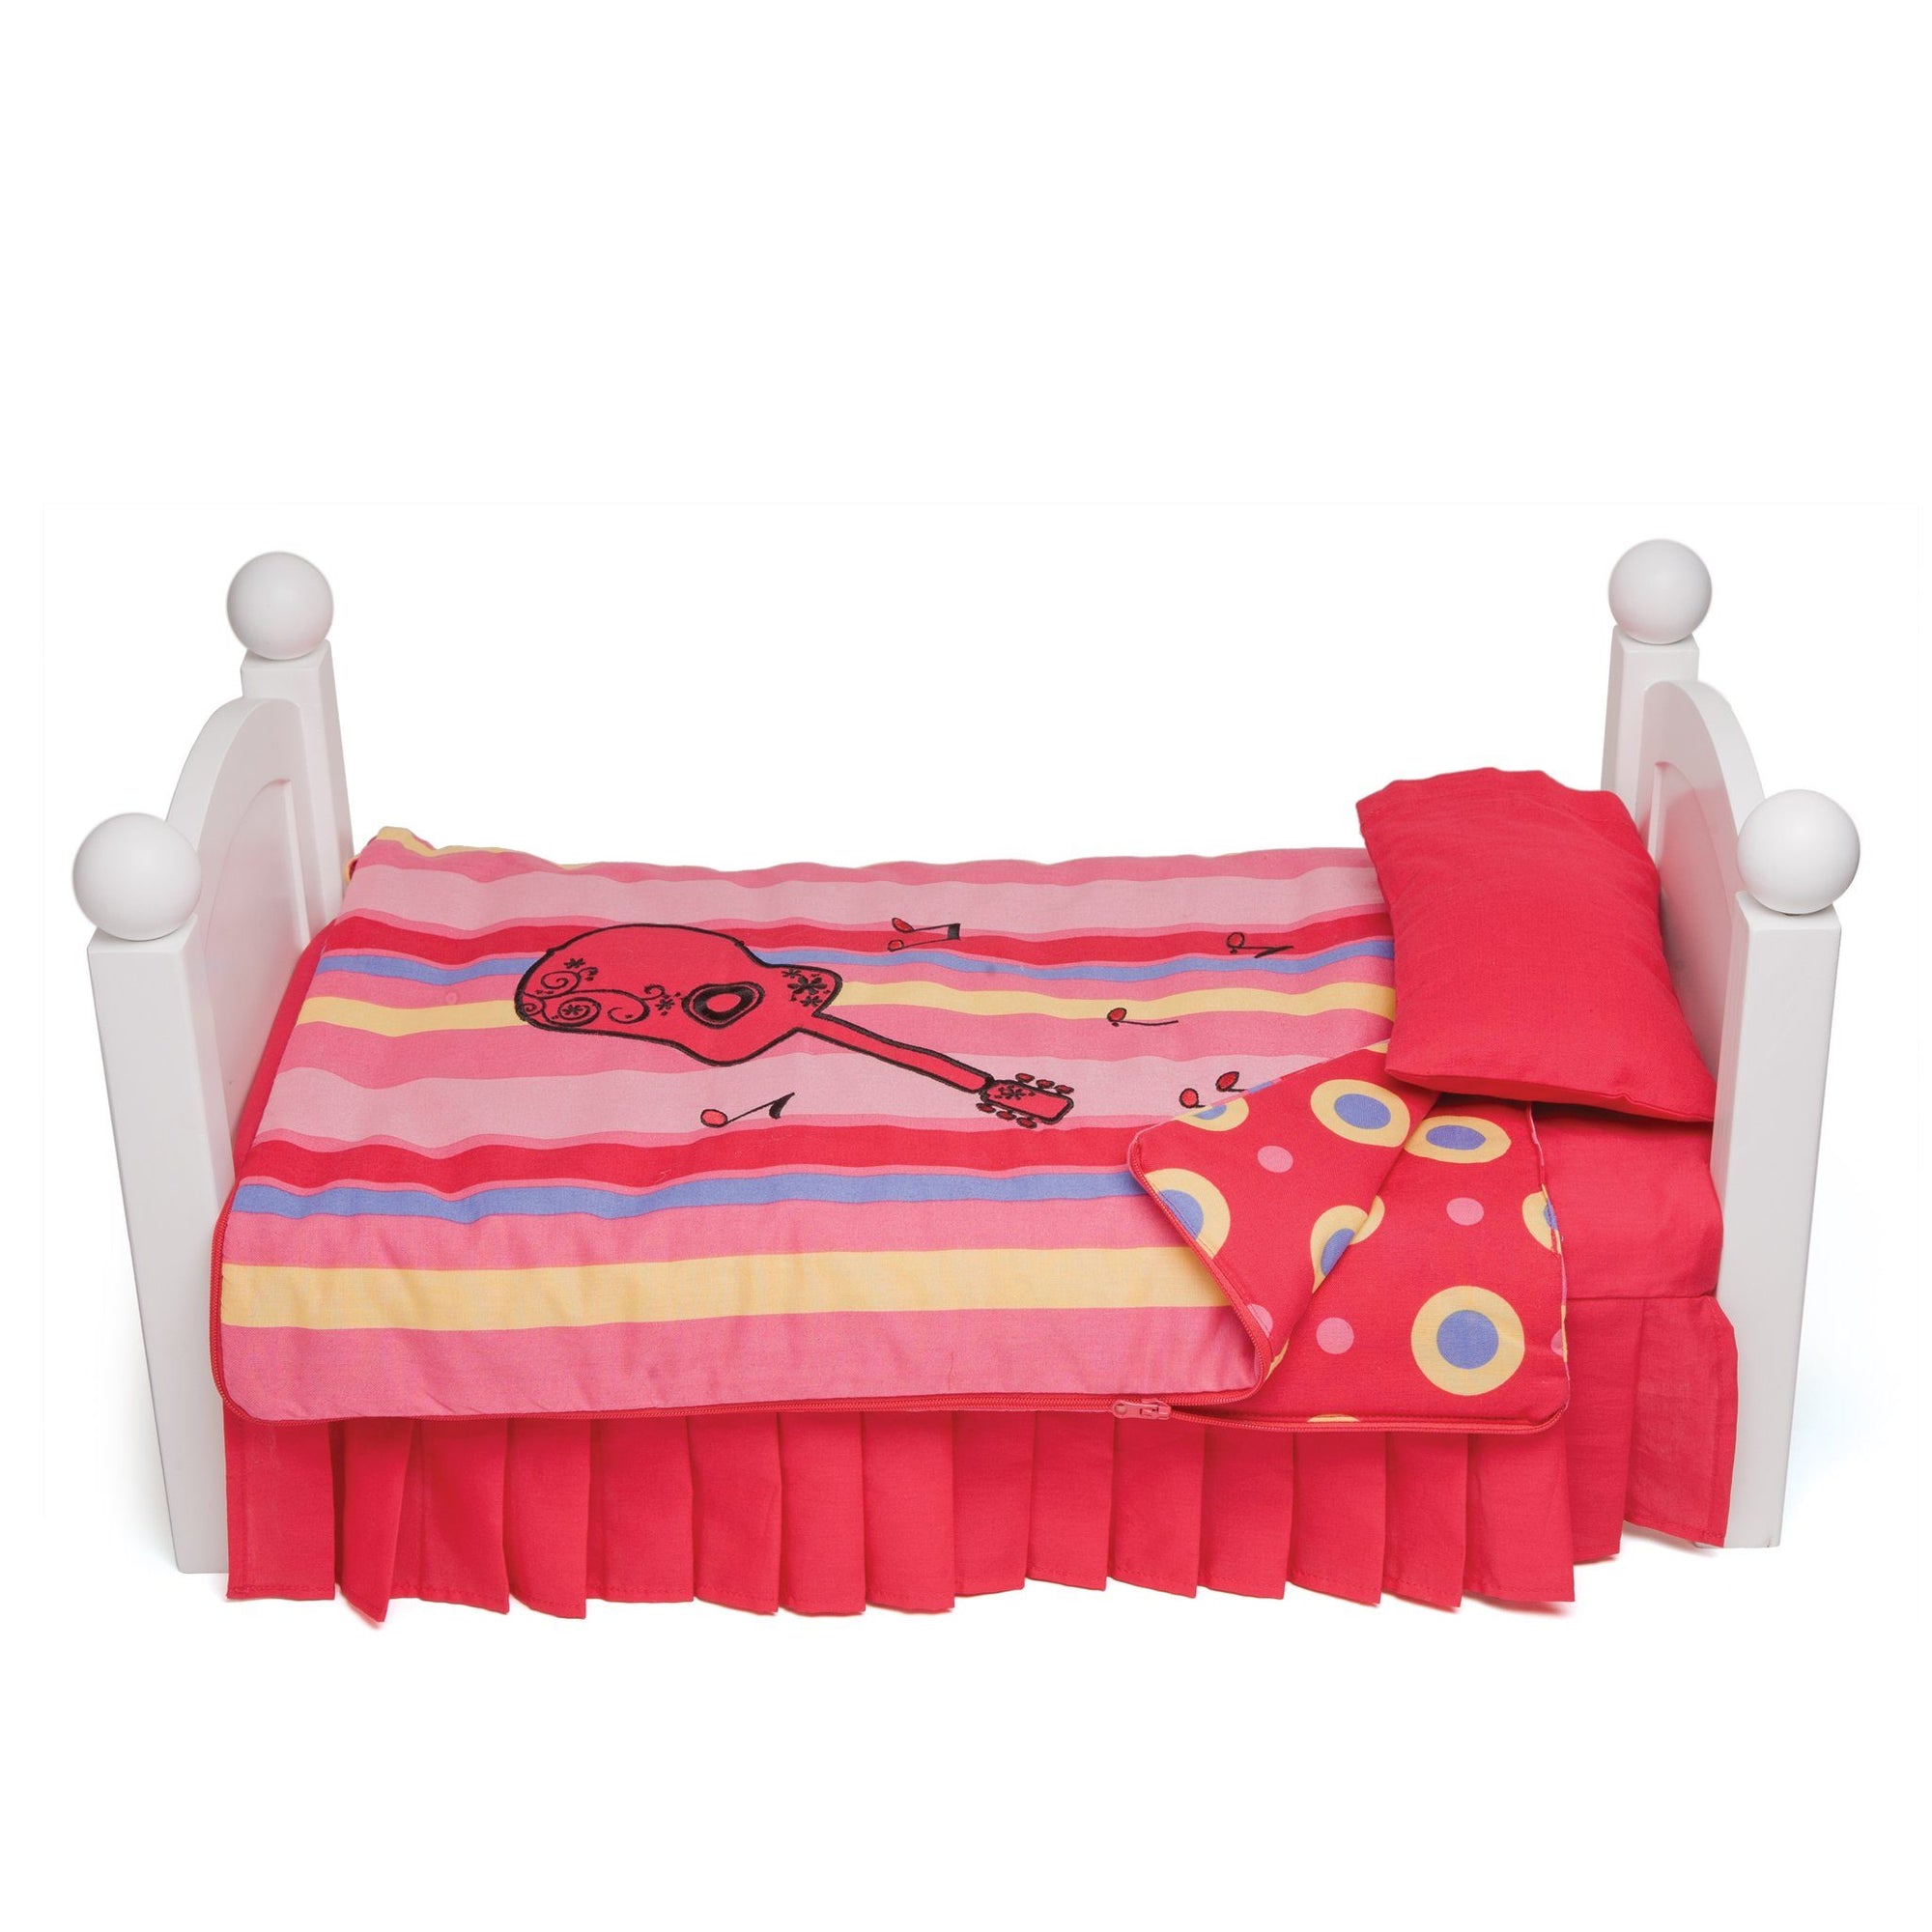 Harmony red guitar-themed bedding with mattress, pillow and striped pattern comforter and contrast circle pattern. Converts to sleeping bag. Shown on KM1 Maplelea doll bed, fits all 18 inch dolls. 